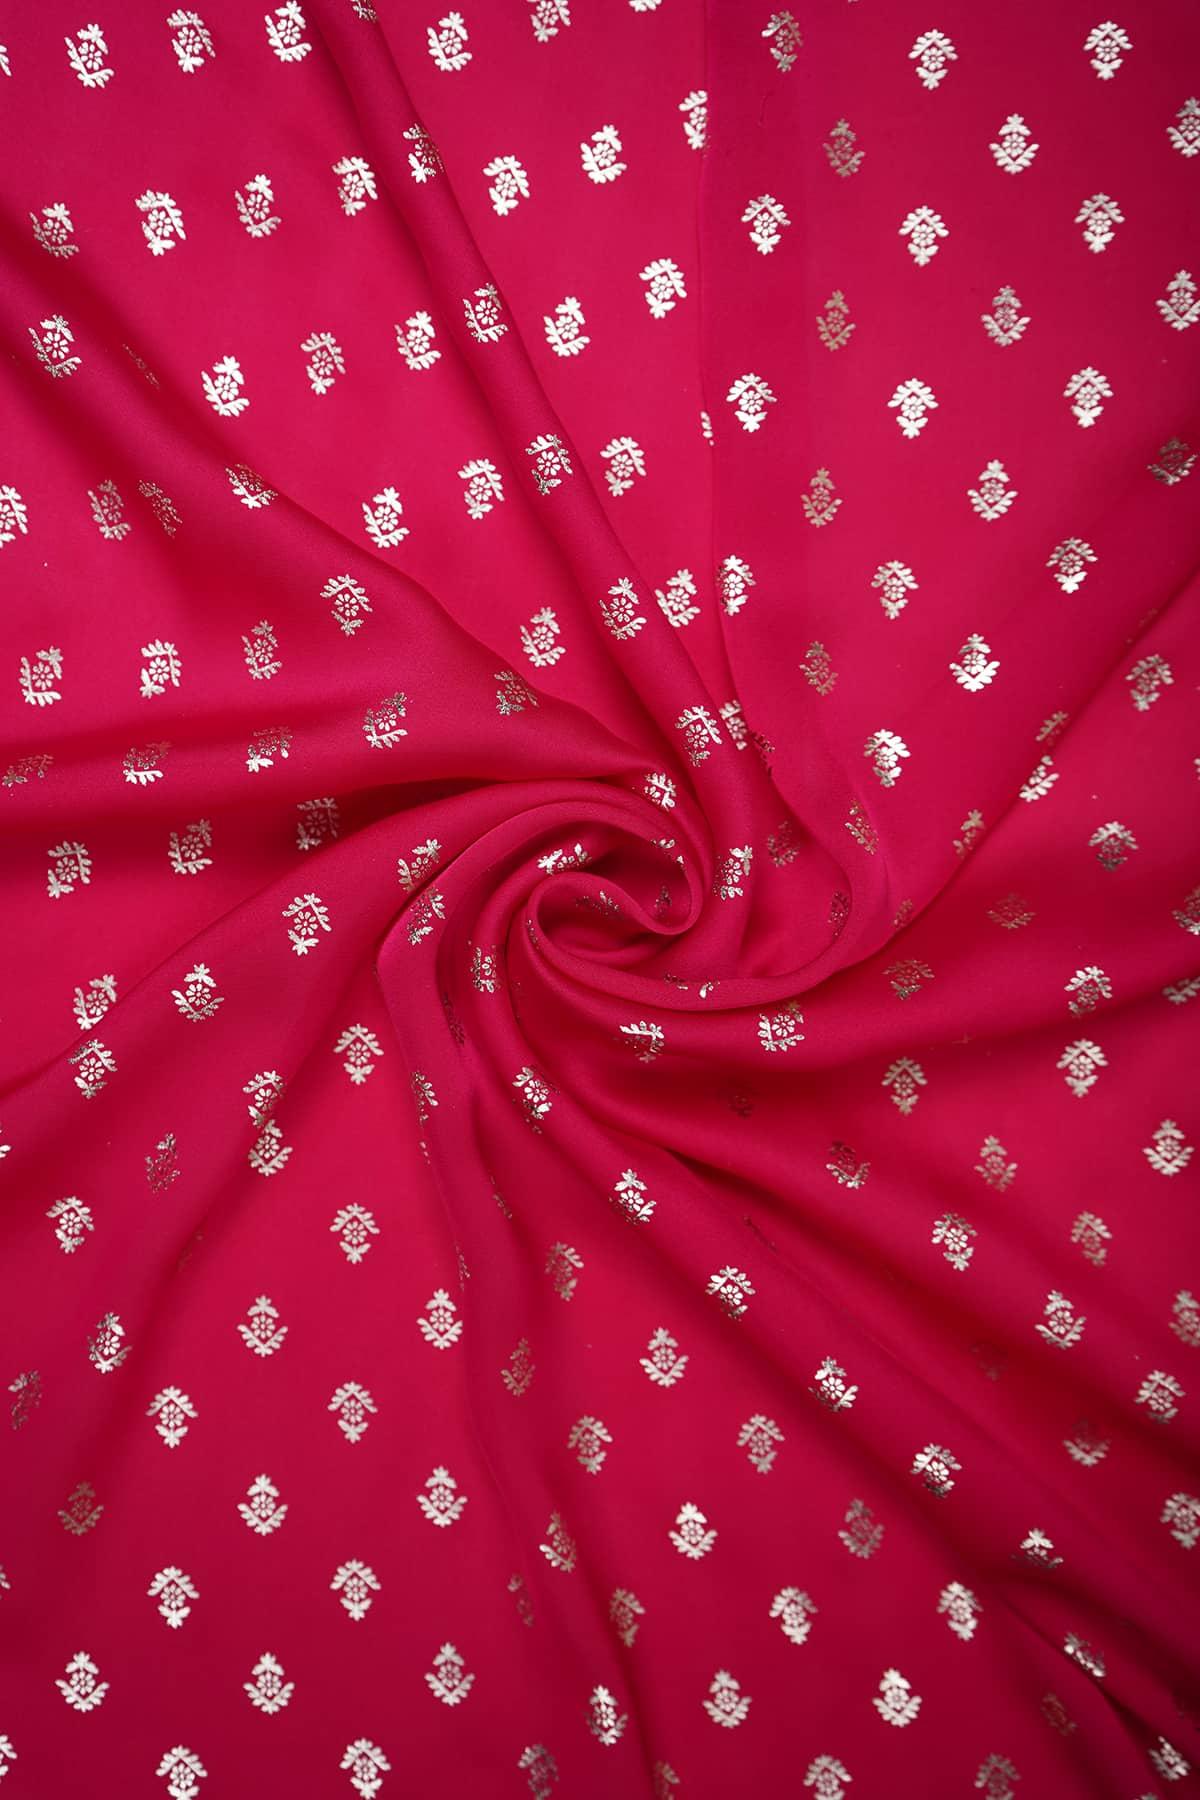 Floral Motif Foil Printed on Pink Color Charmie Satin - saraaha.com - accesories, Charmie Satin, dresses and more, gowns, indo western, kurtas, sarees, Satin, Screen Print Foil Work, skirts, Suits, tops, trimmings